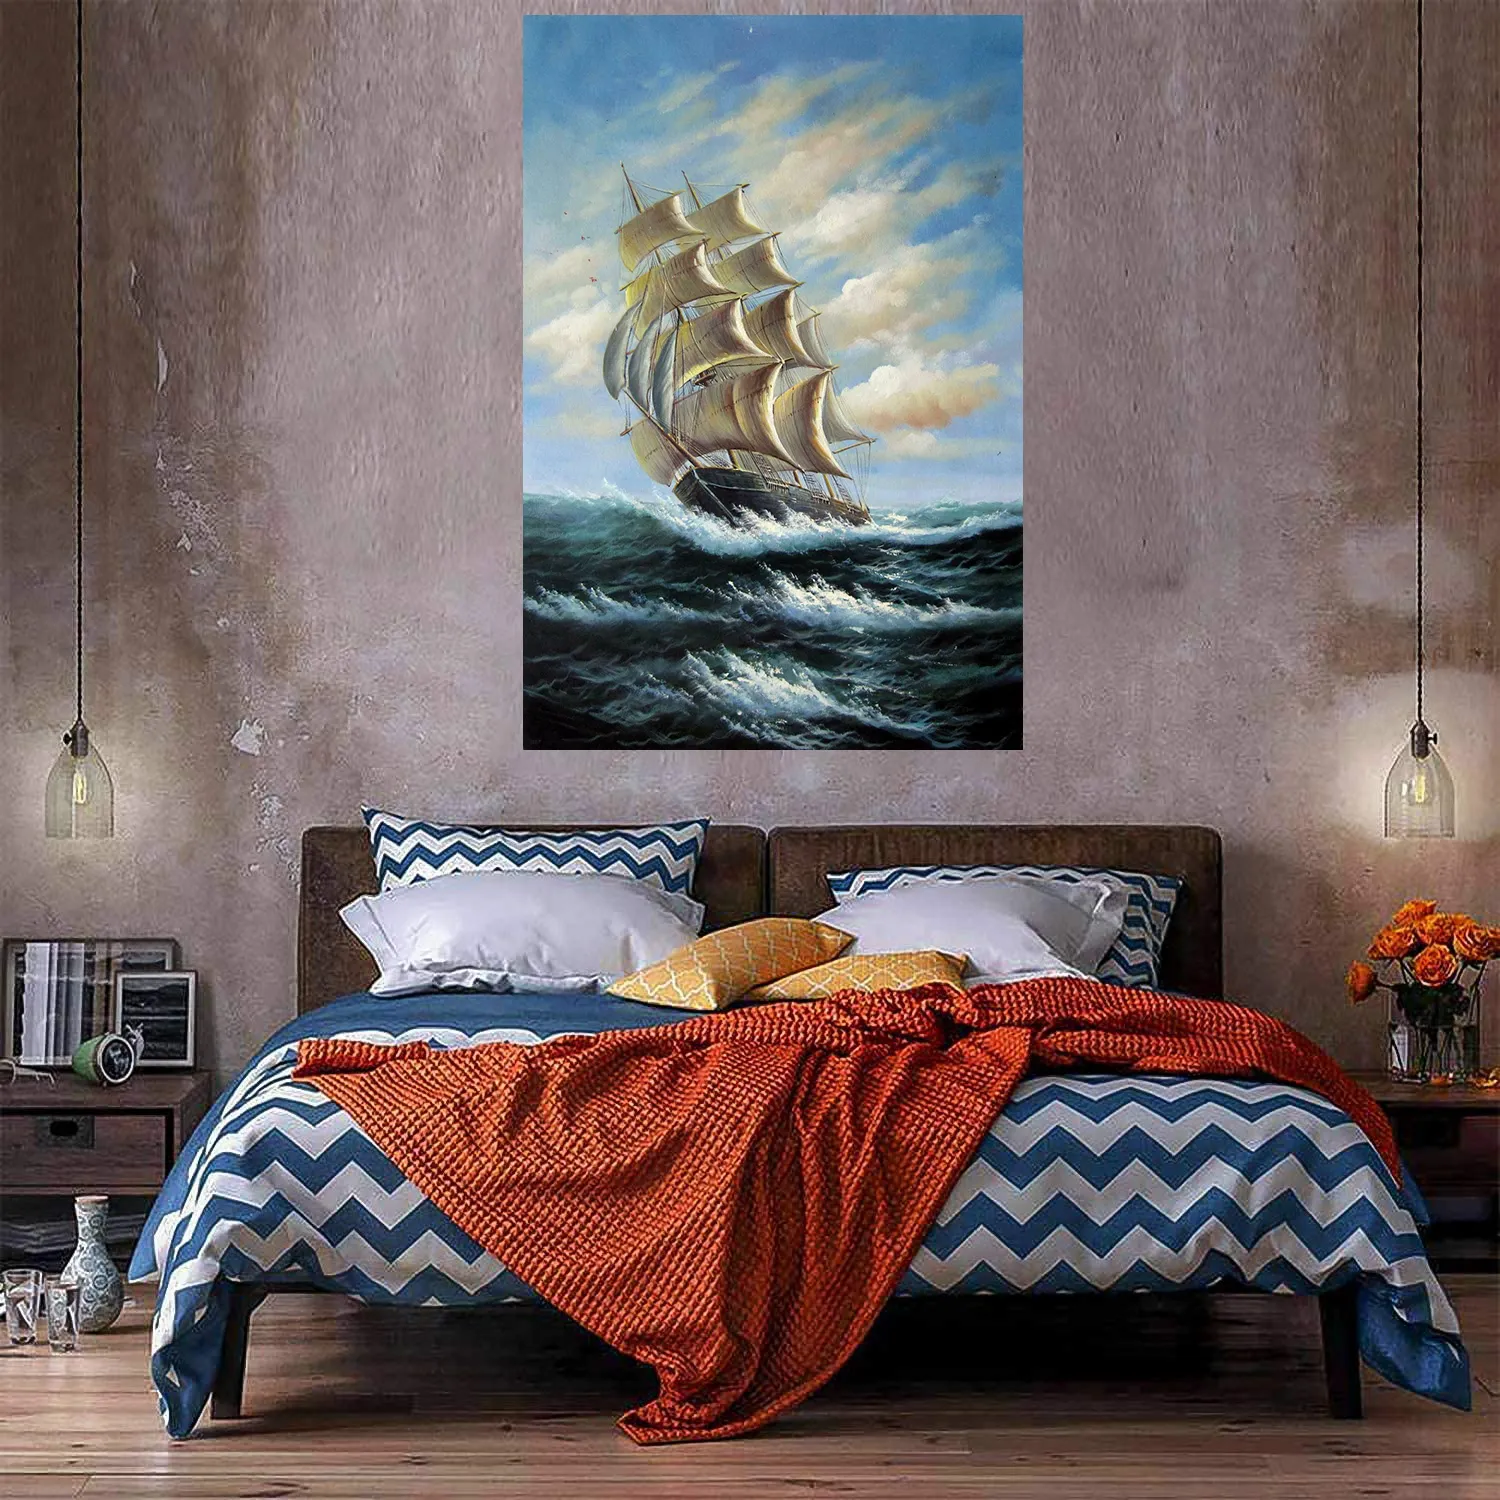 Tall ship sailing Oil Painting On Canvas Home Decor Handpainted/HD-Print Wall Art Picture Customization is acceptable 21060613